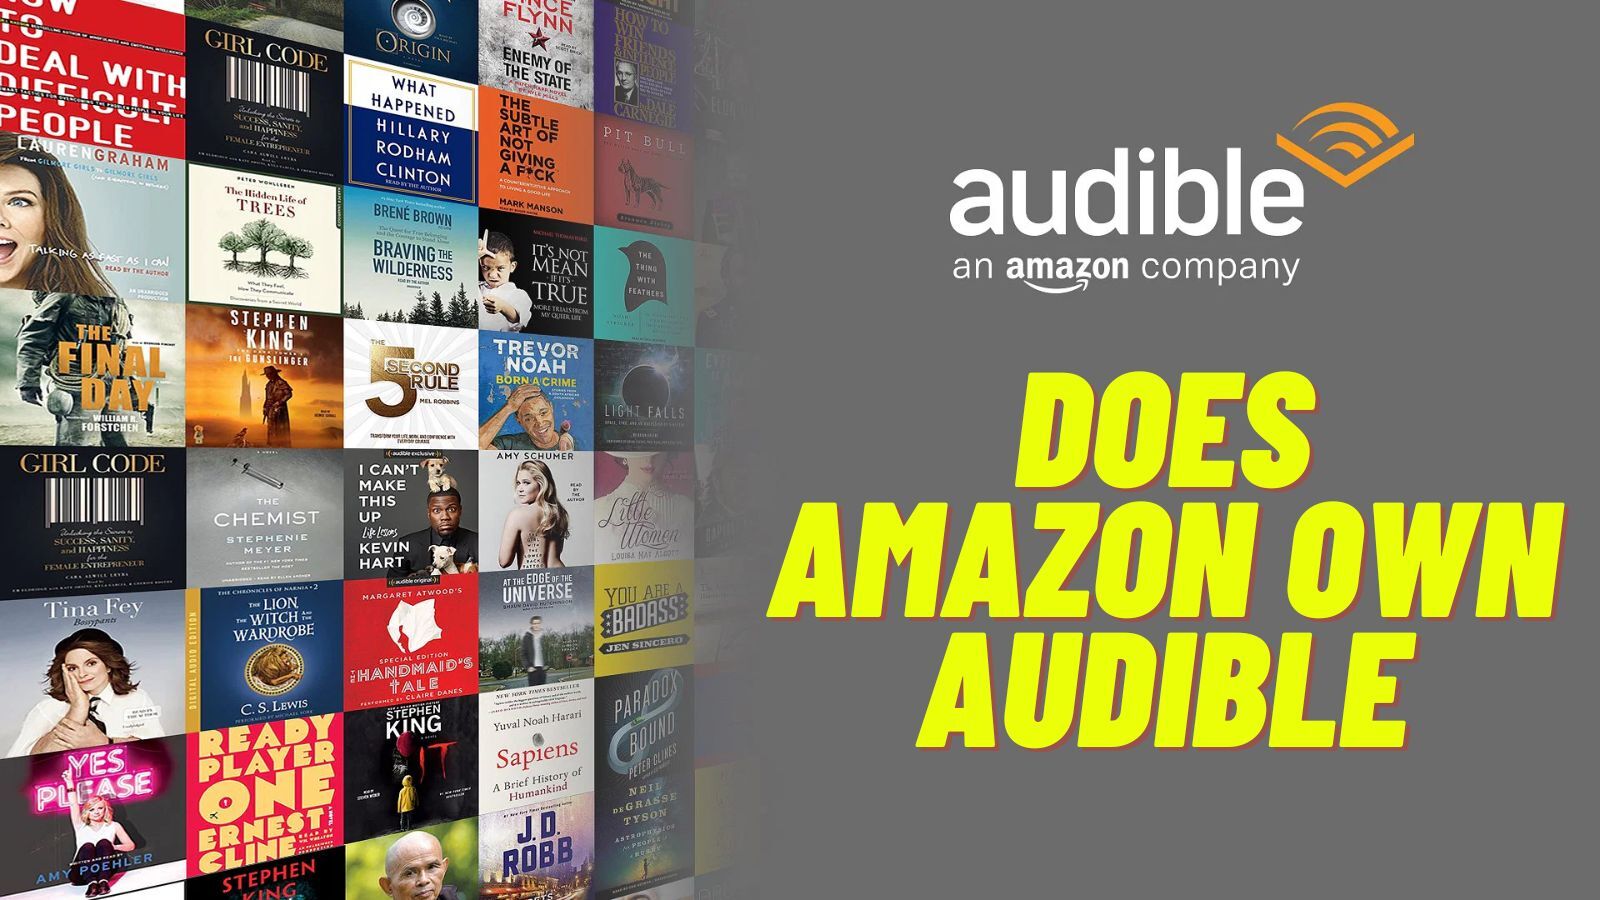 Does Amazon Own Audible? (Something You May Be Interested In)